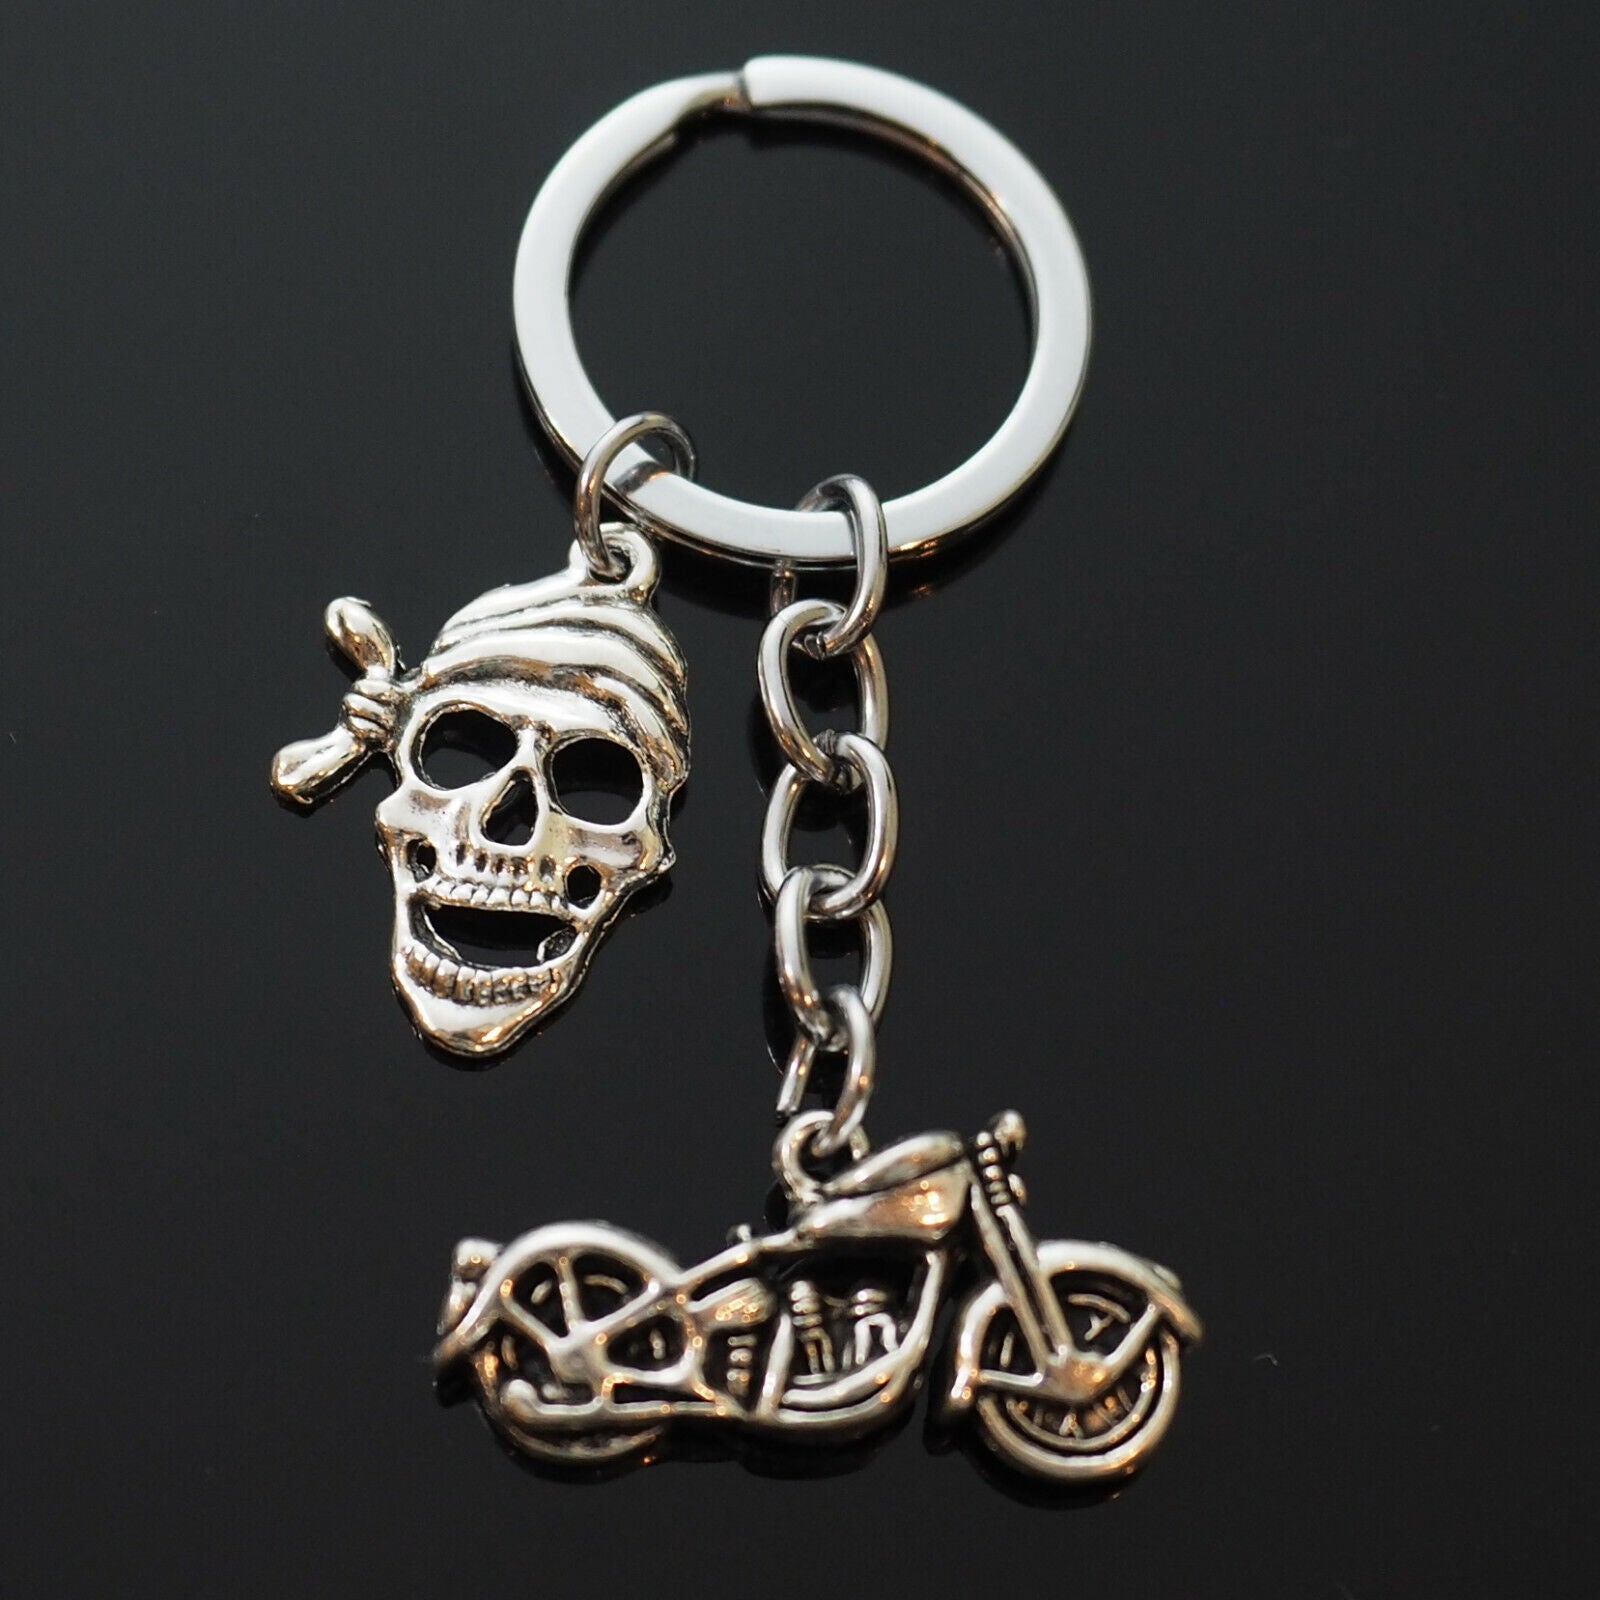 A skull emblem keychain for the fearless rider